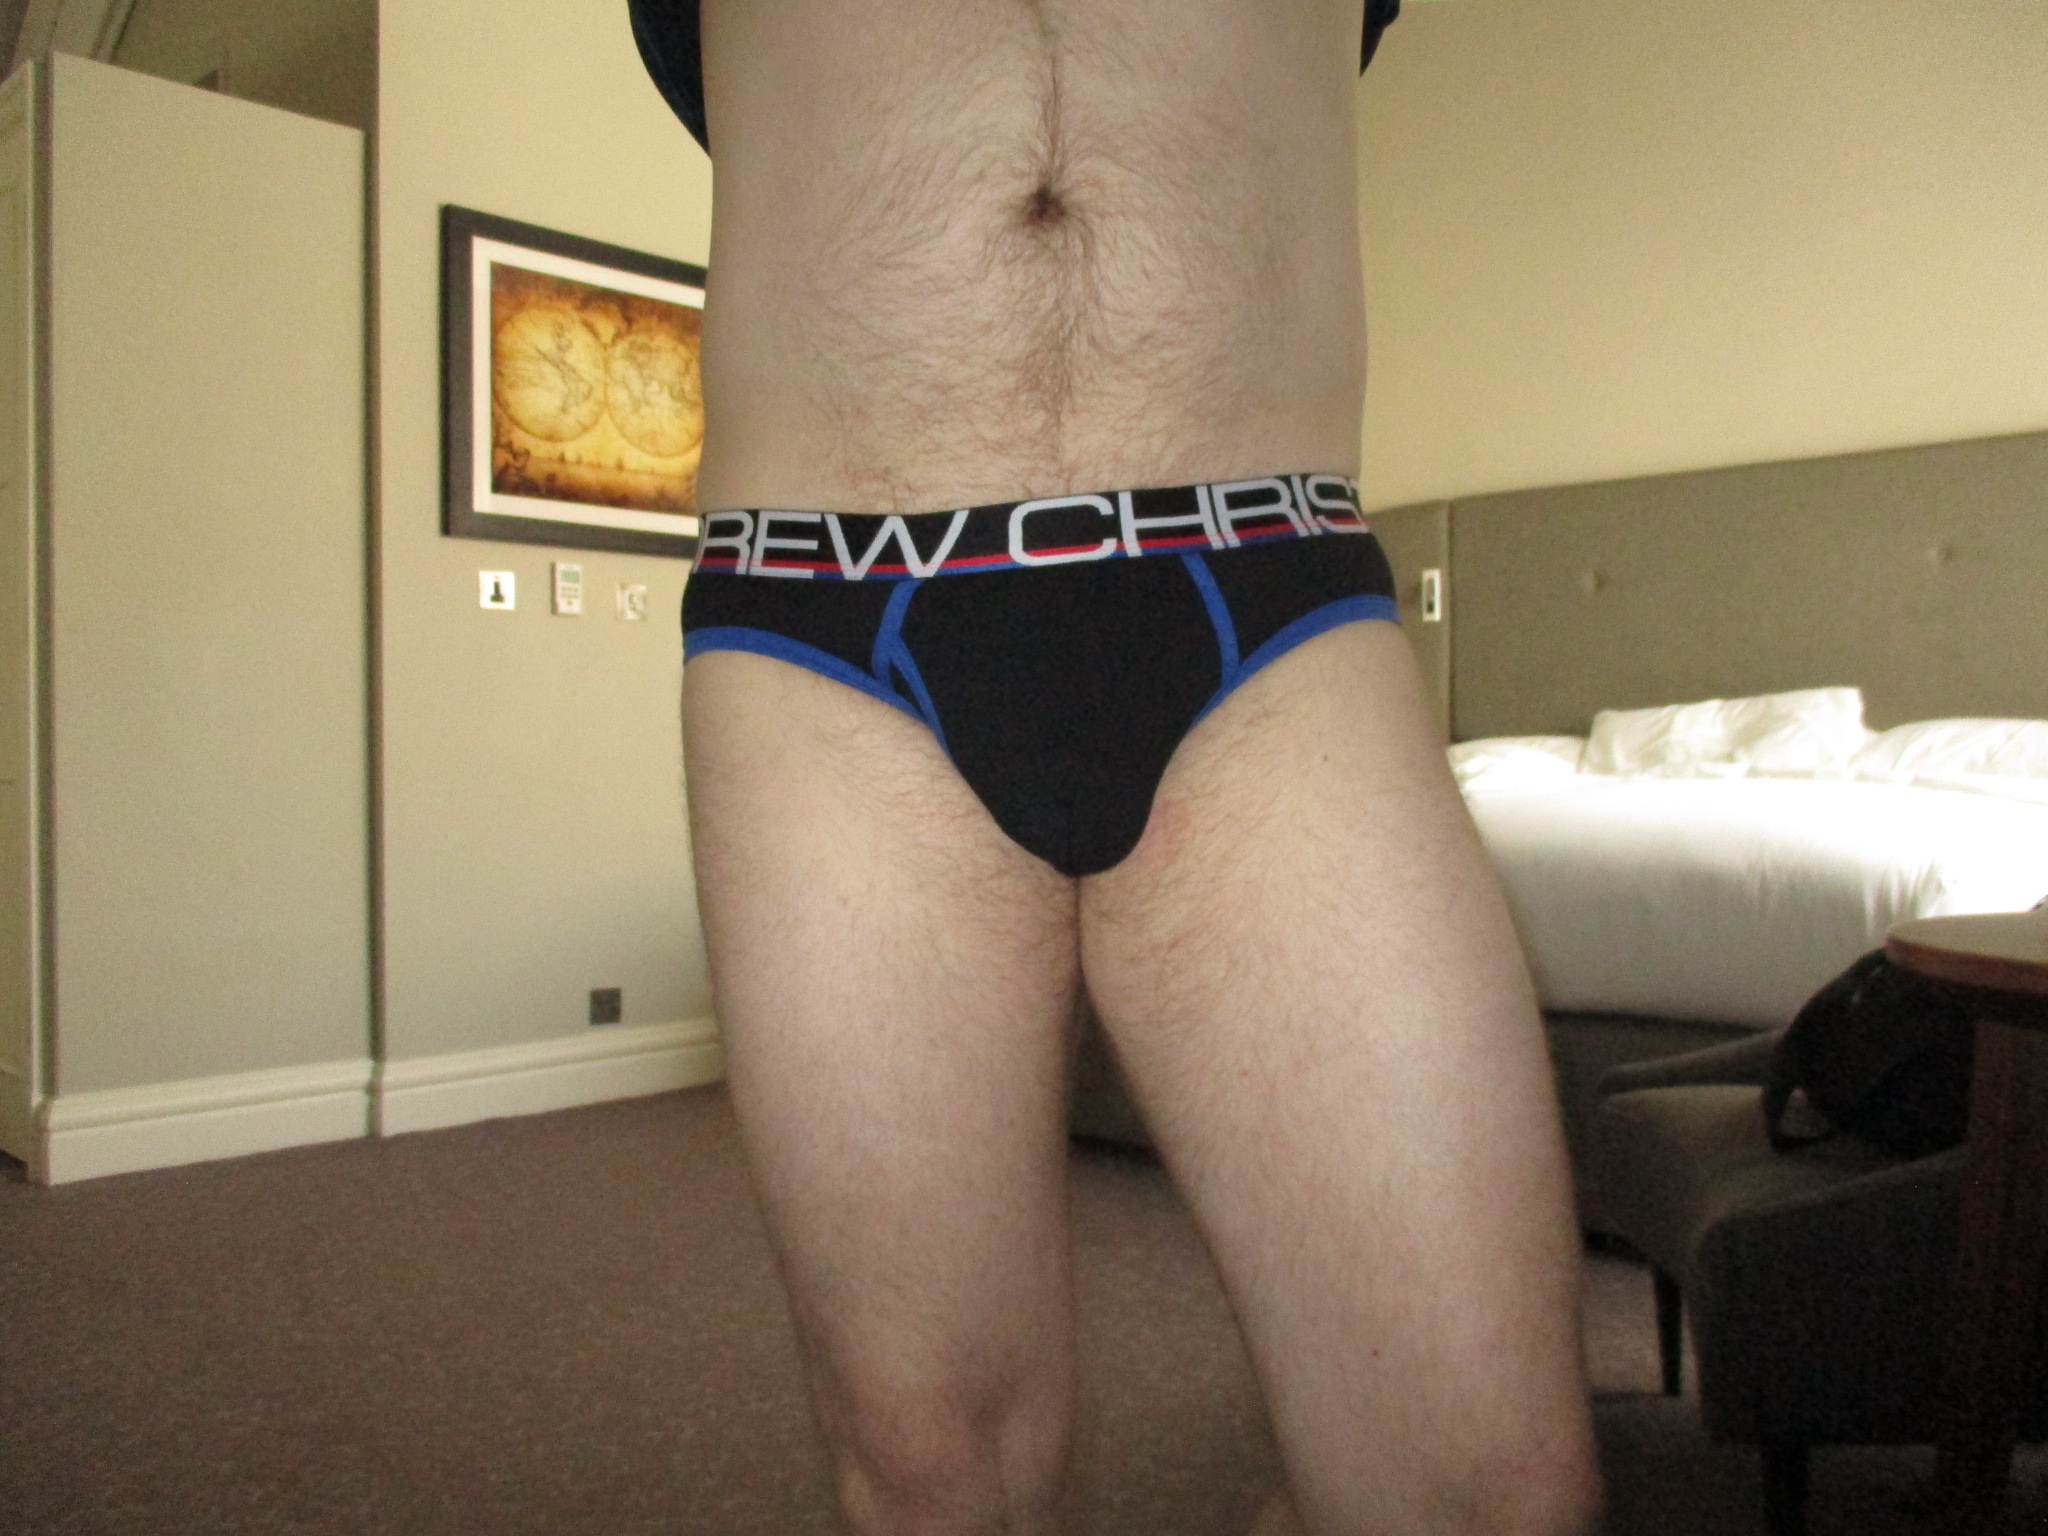 Back to Black…well, for my underwear anyway…